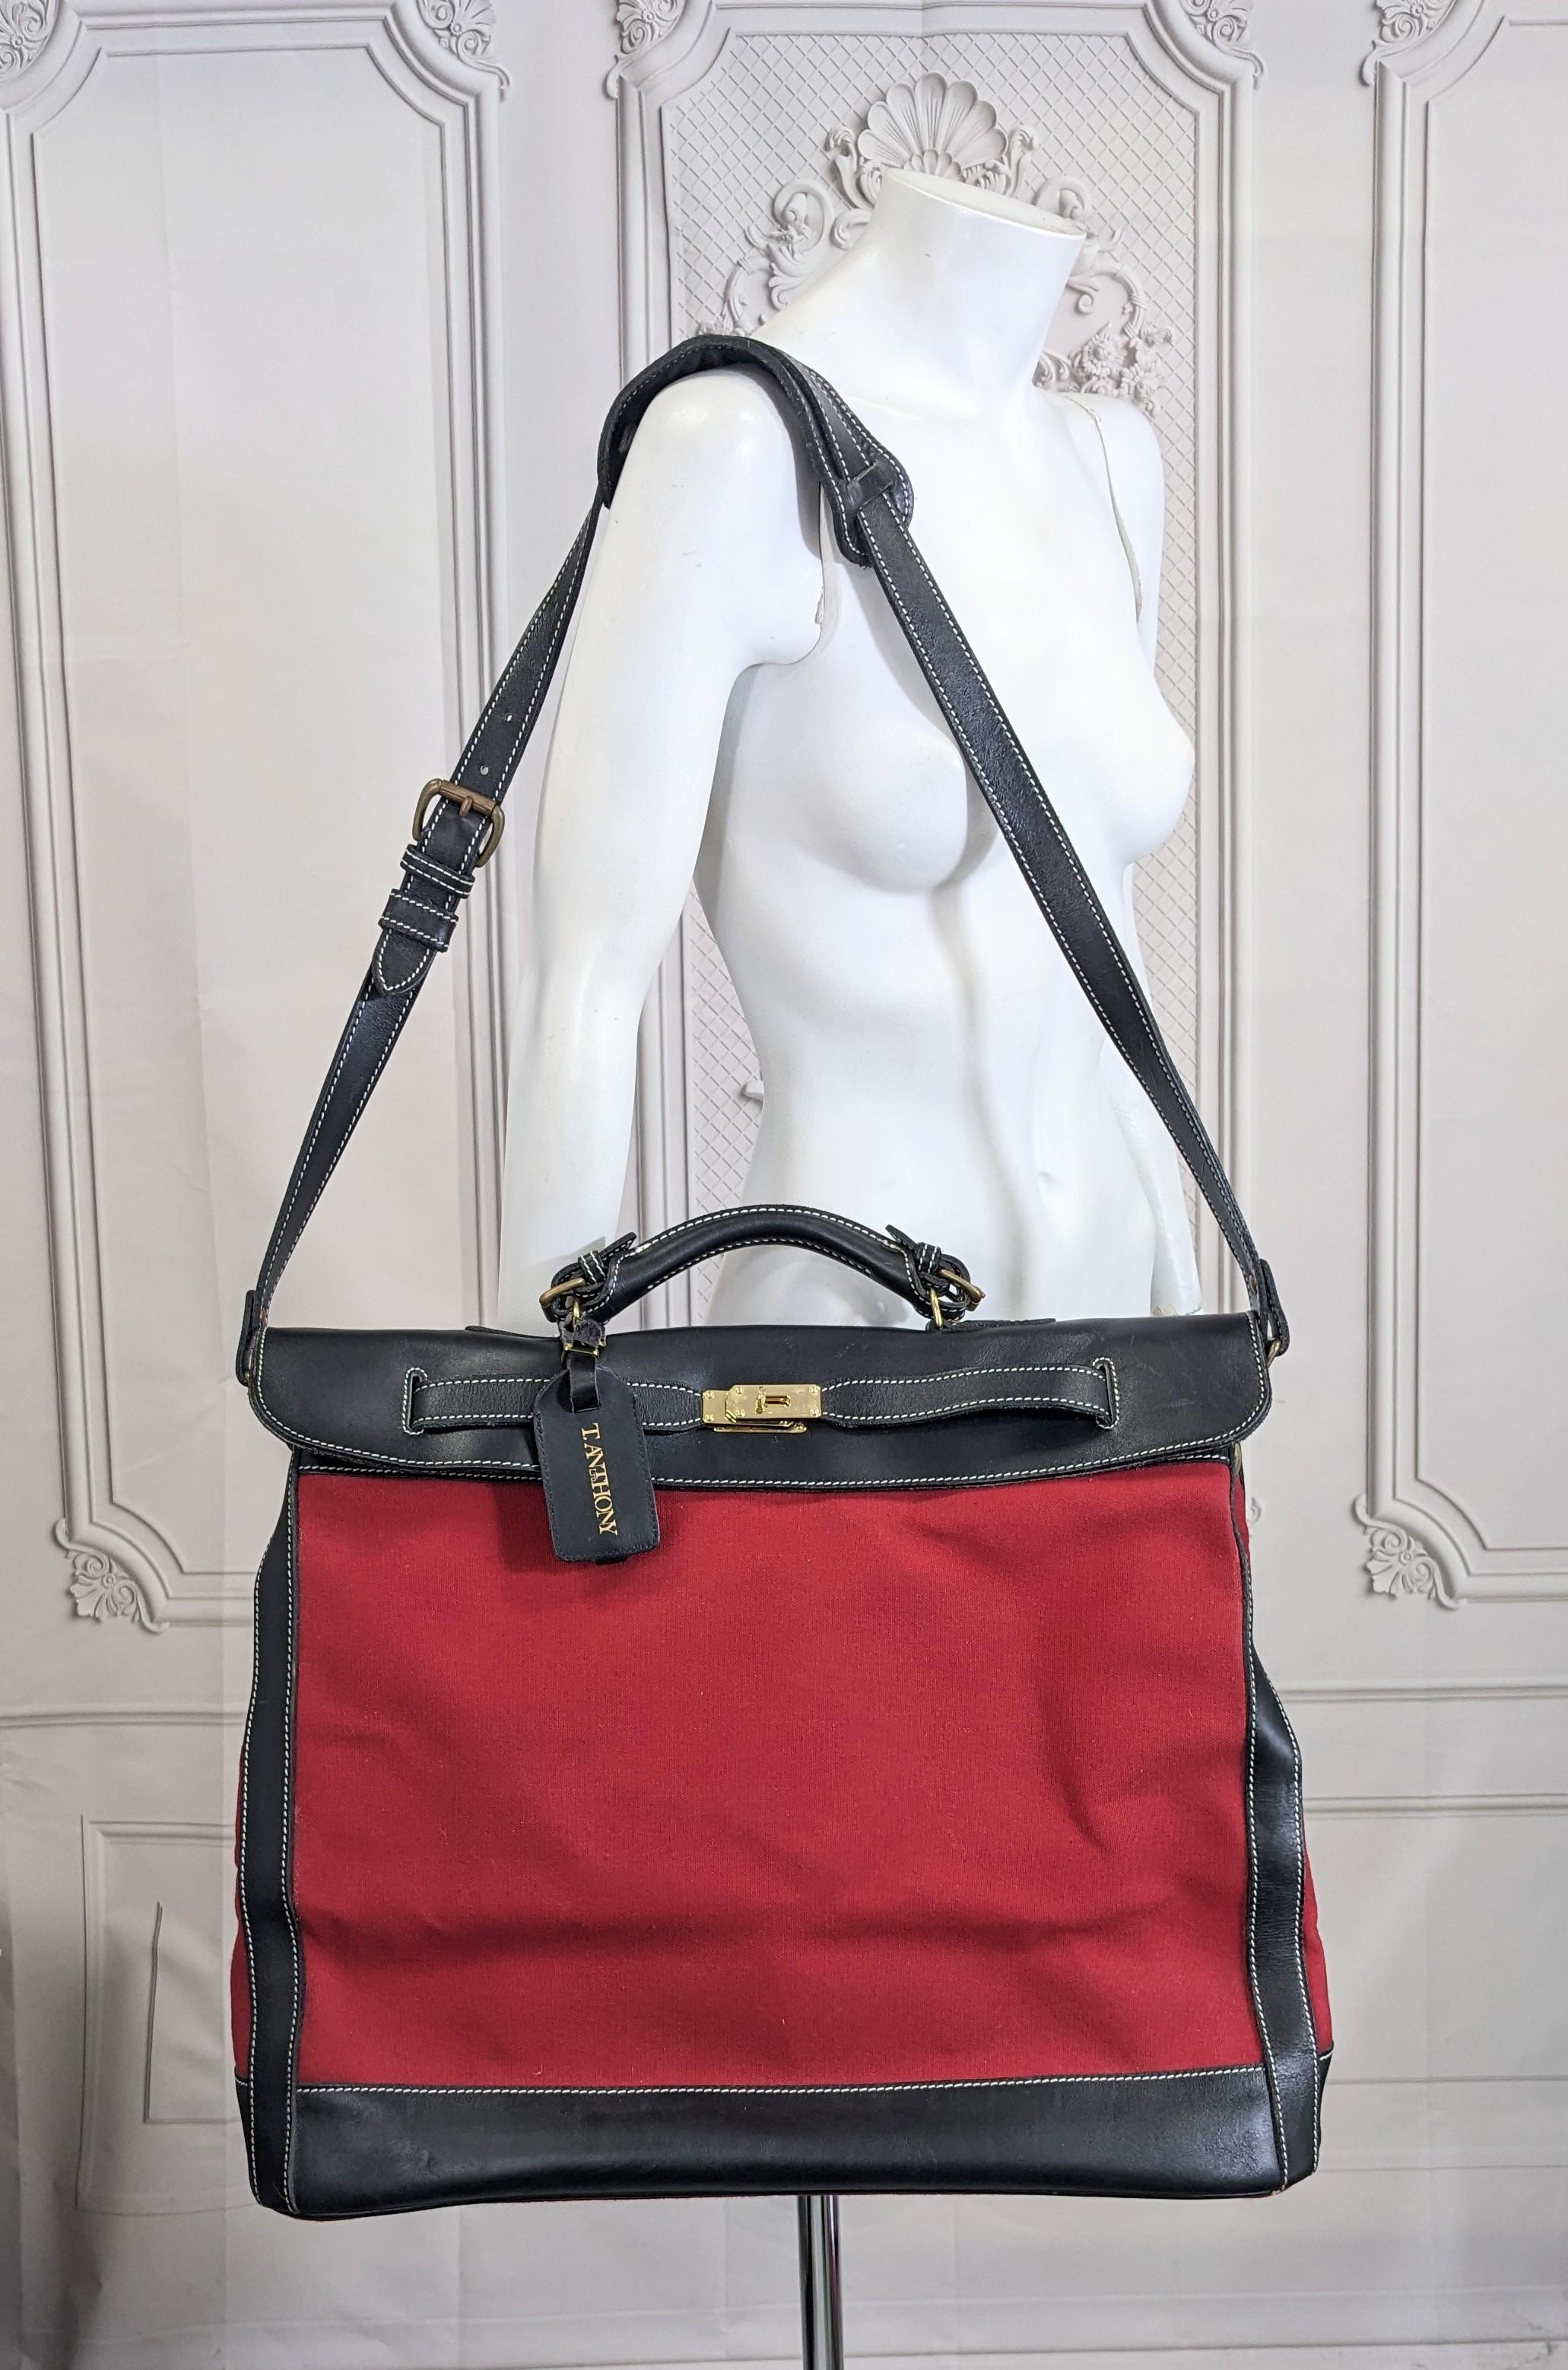 Striking Hermes Style Leather and Canvas Travel Bag by T. Anthony from the 1990's. Heavy red cotton canvas paired with black calf leather in this oversized Birkin style weekend travel bag.
Please note this is a high quality bag, constructed in the